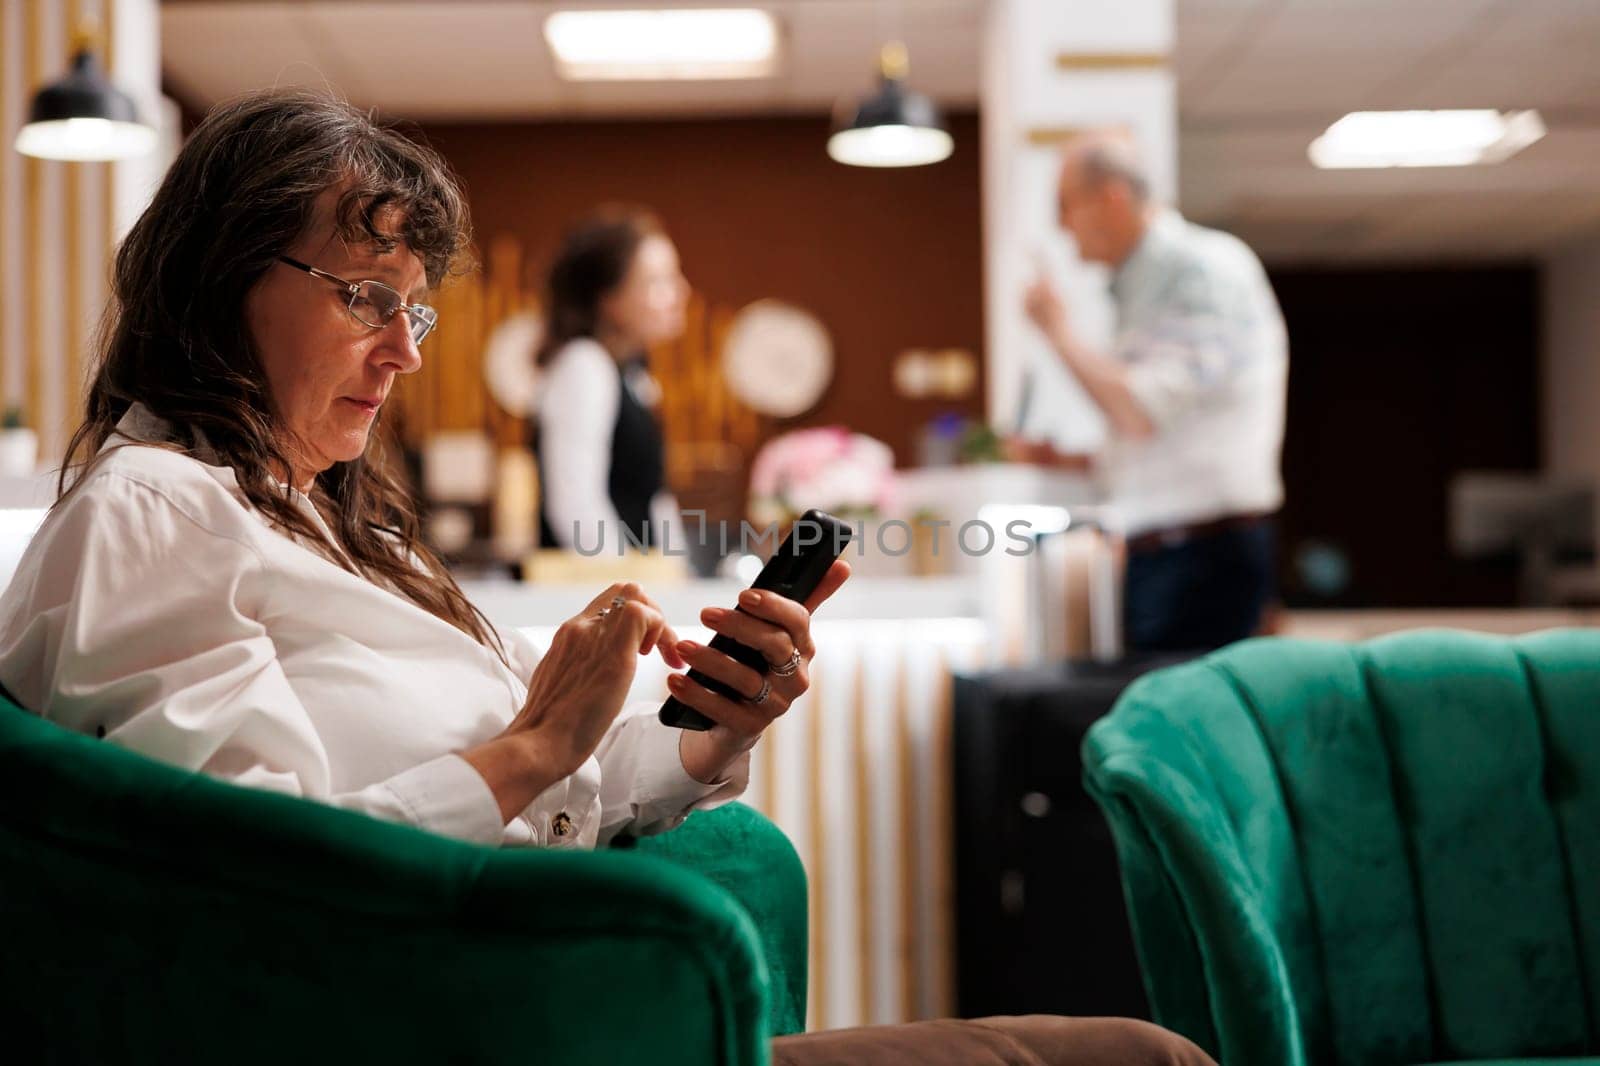 Retired senior woman enjoys online connectivity in hotel lobby, using mobile phone for communication and relaxation. Elderly female traveler relaxing with smartphone in luxury lounge area.